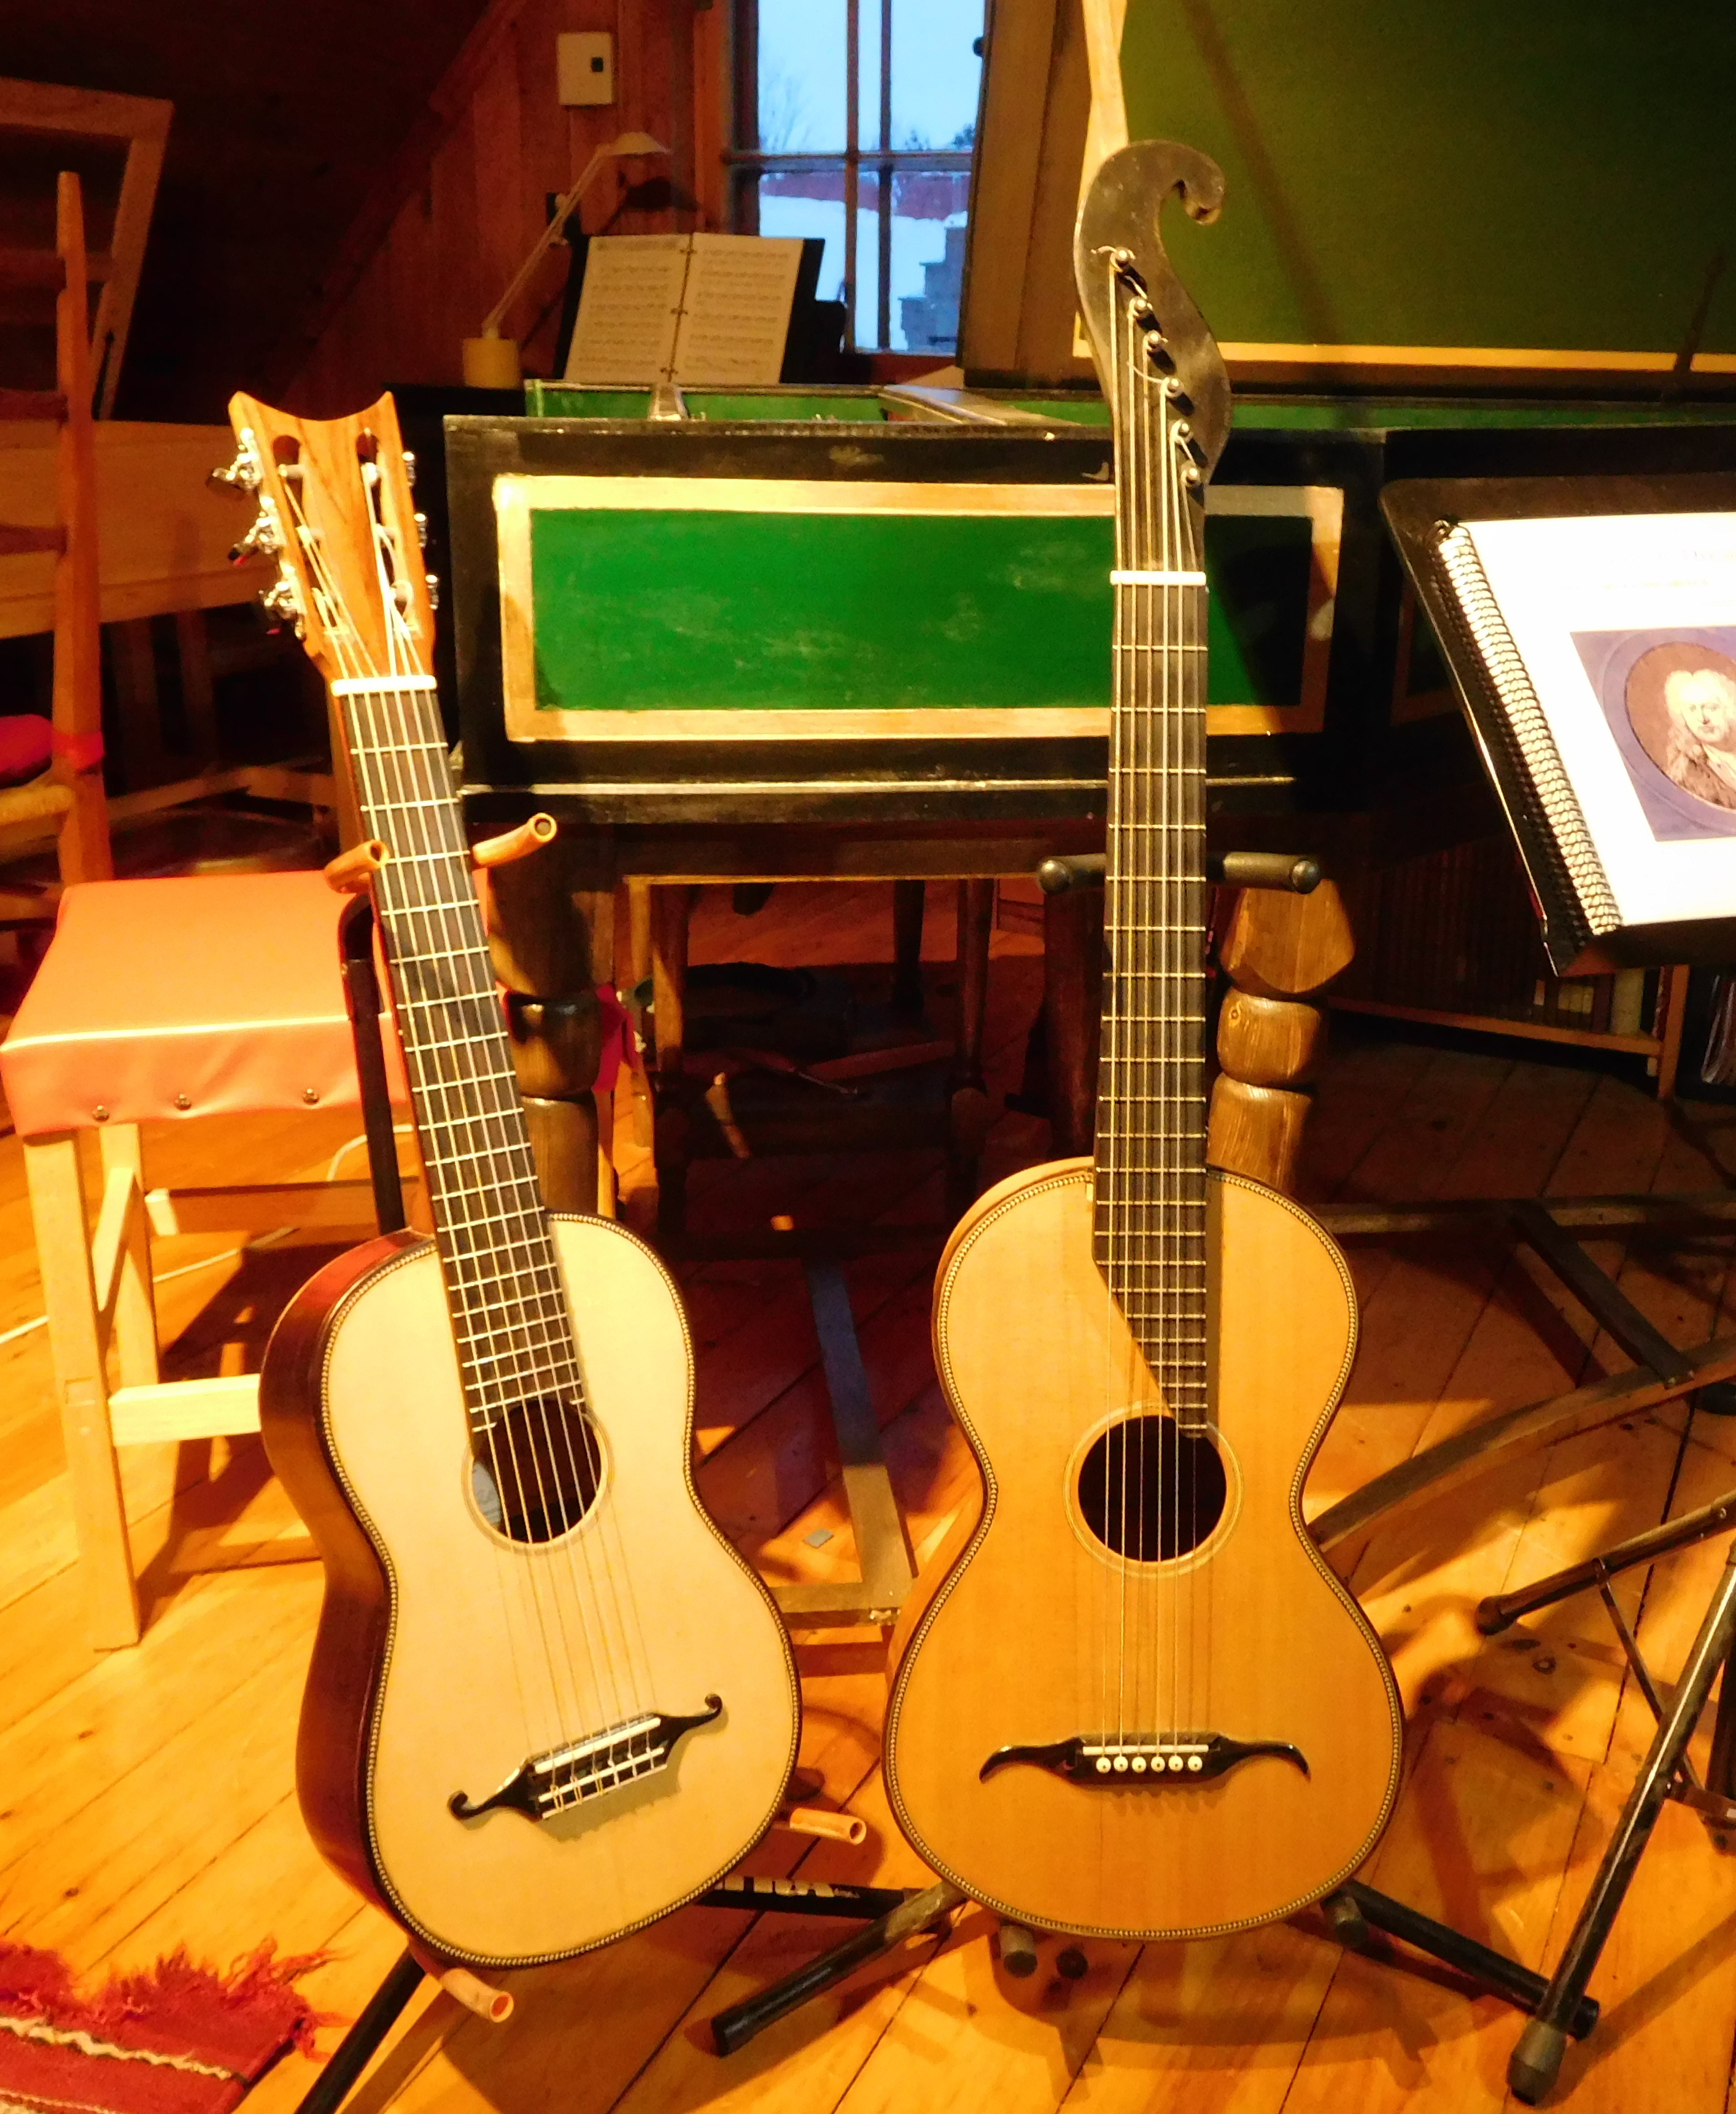 The two sisters, a Terz-guitar and a romantic guitar